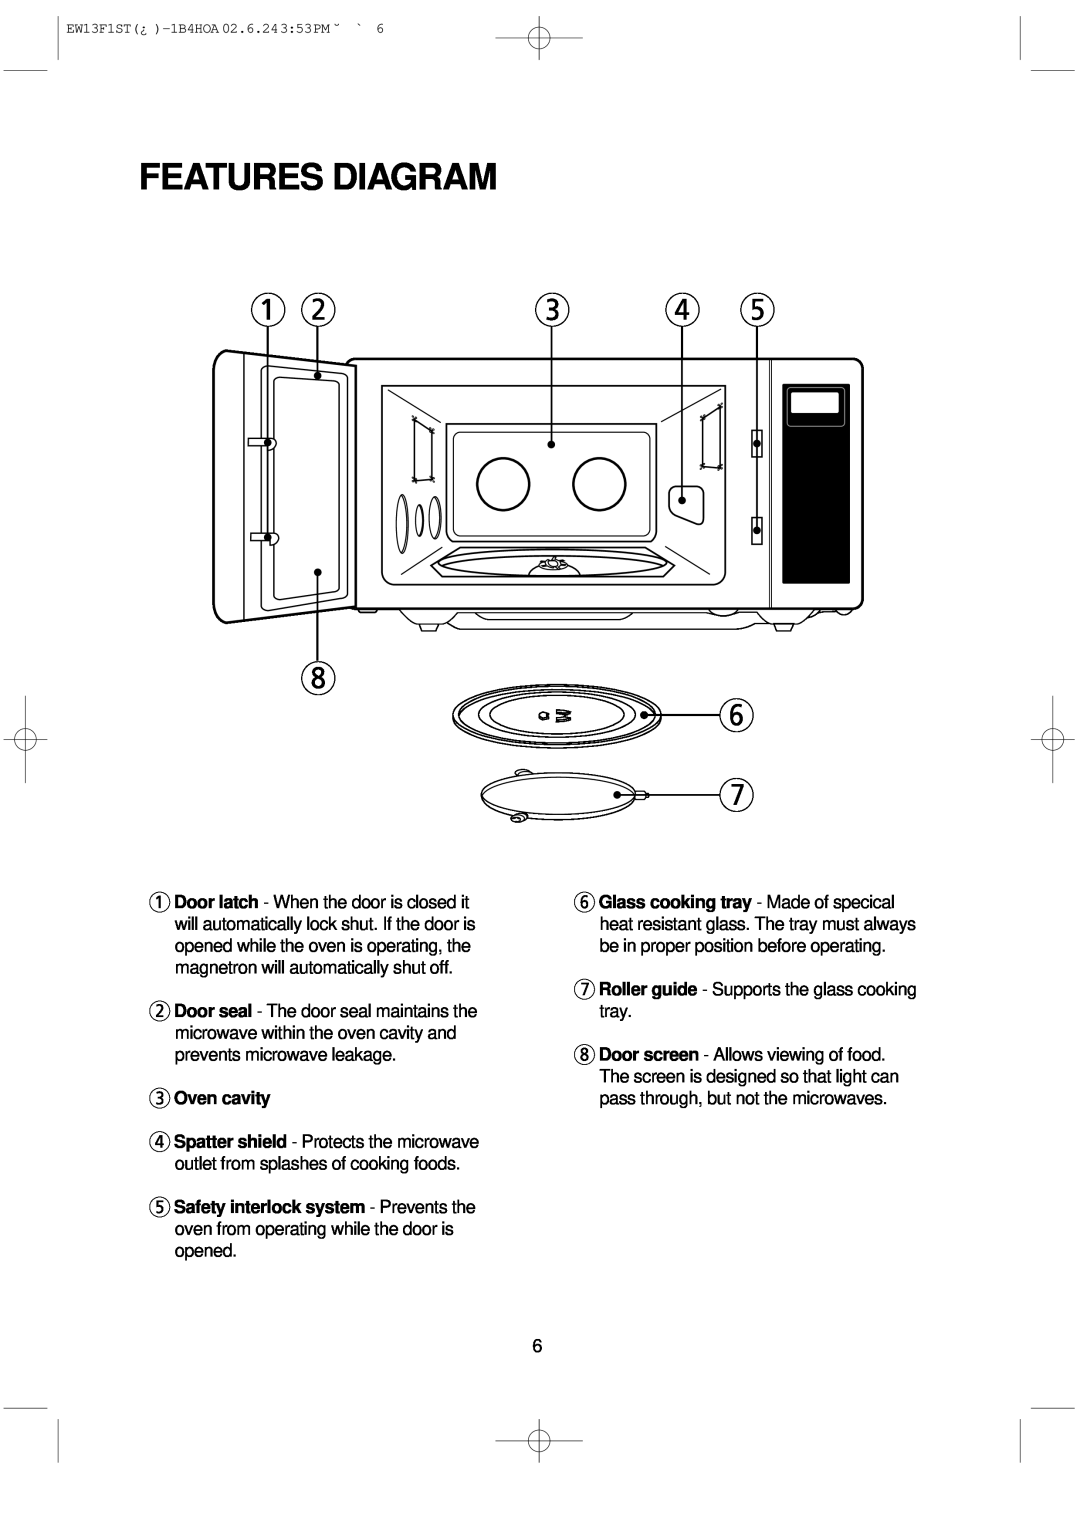 Daewoo EW13F1ST manual Features Diagram, Oven cavity 